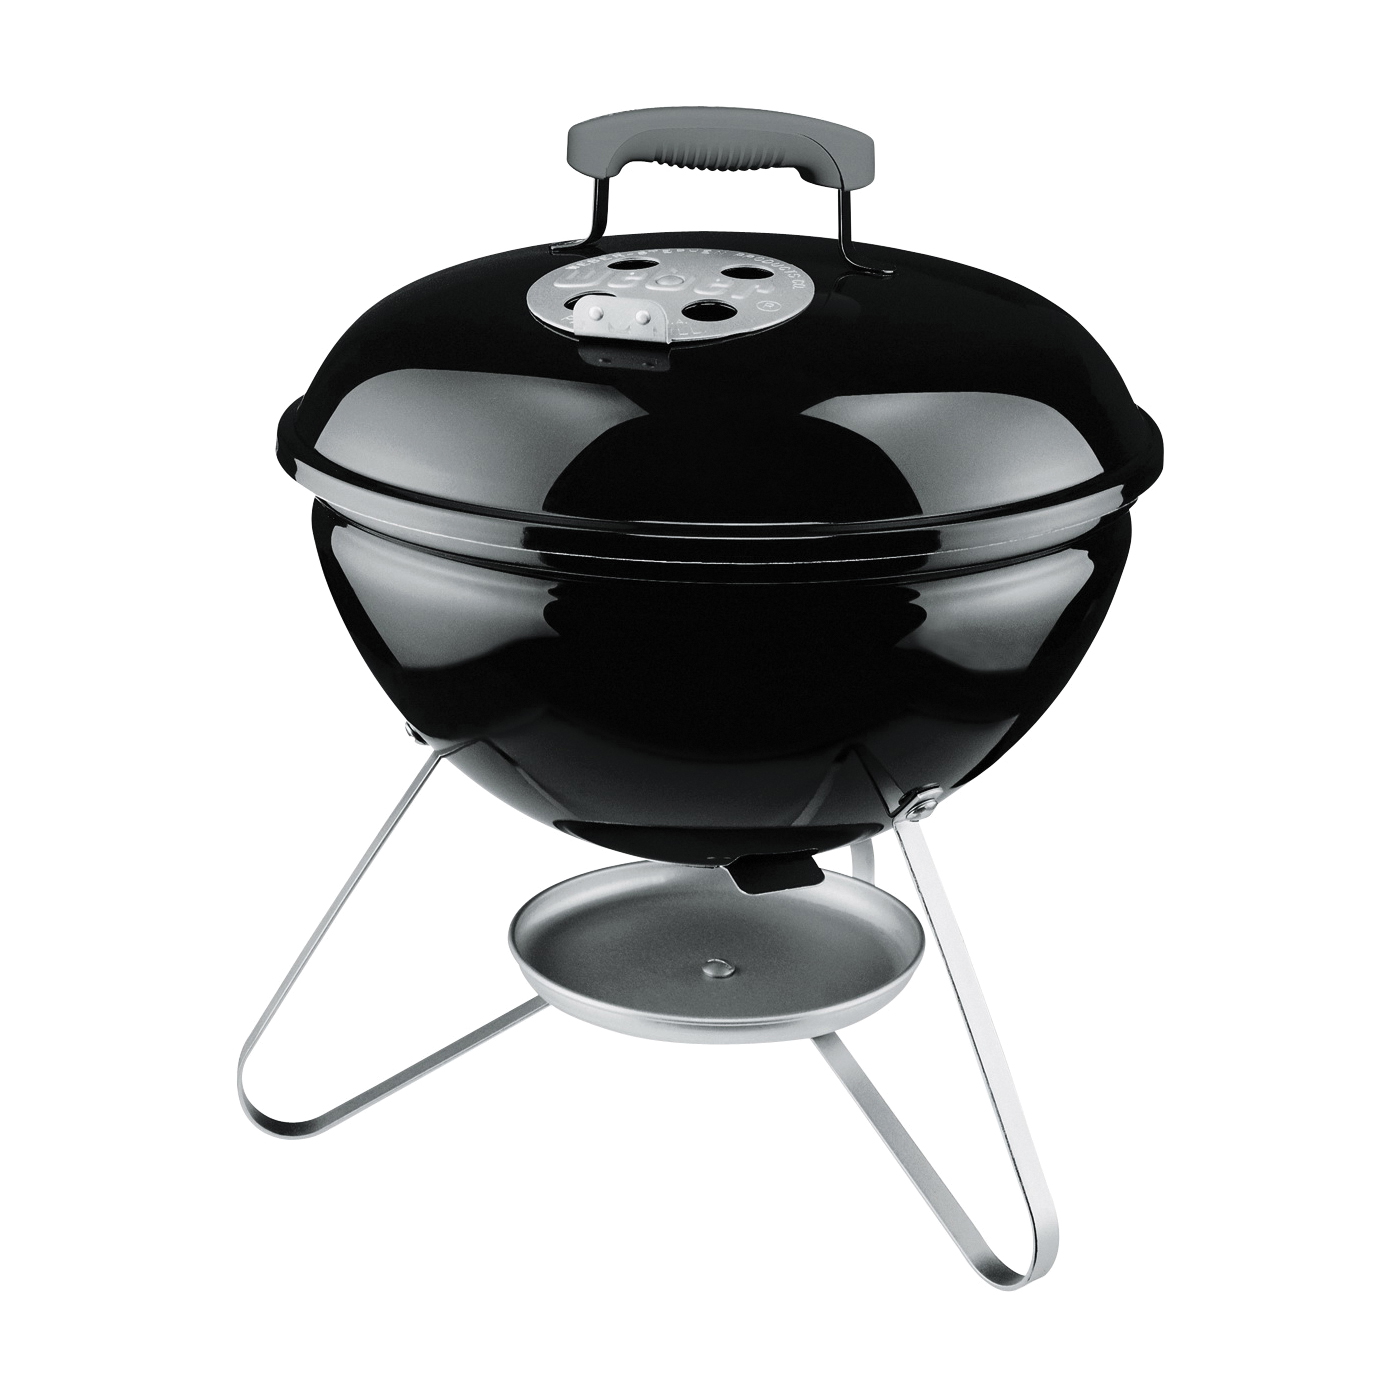 Weber Smokey Joe 10020 Charcoal Grill, 147 sq-in Primary Cooking Surface, Black